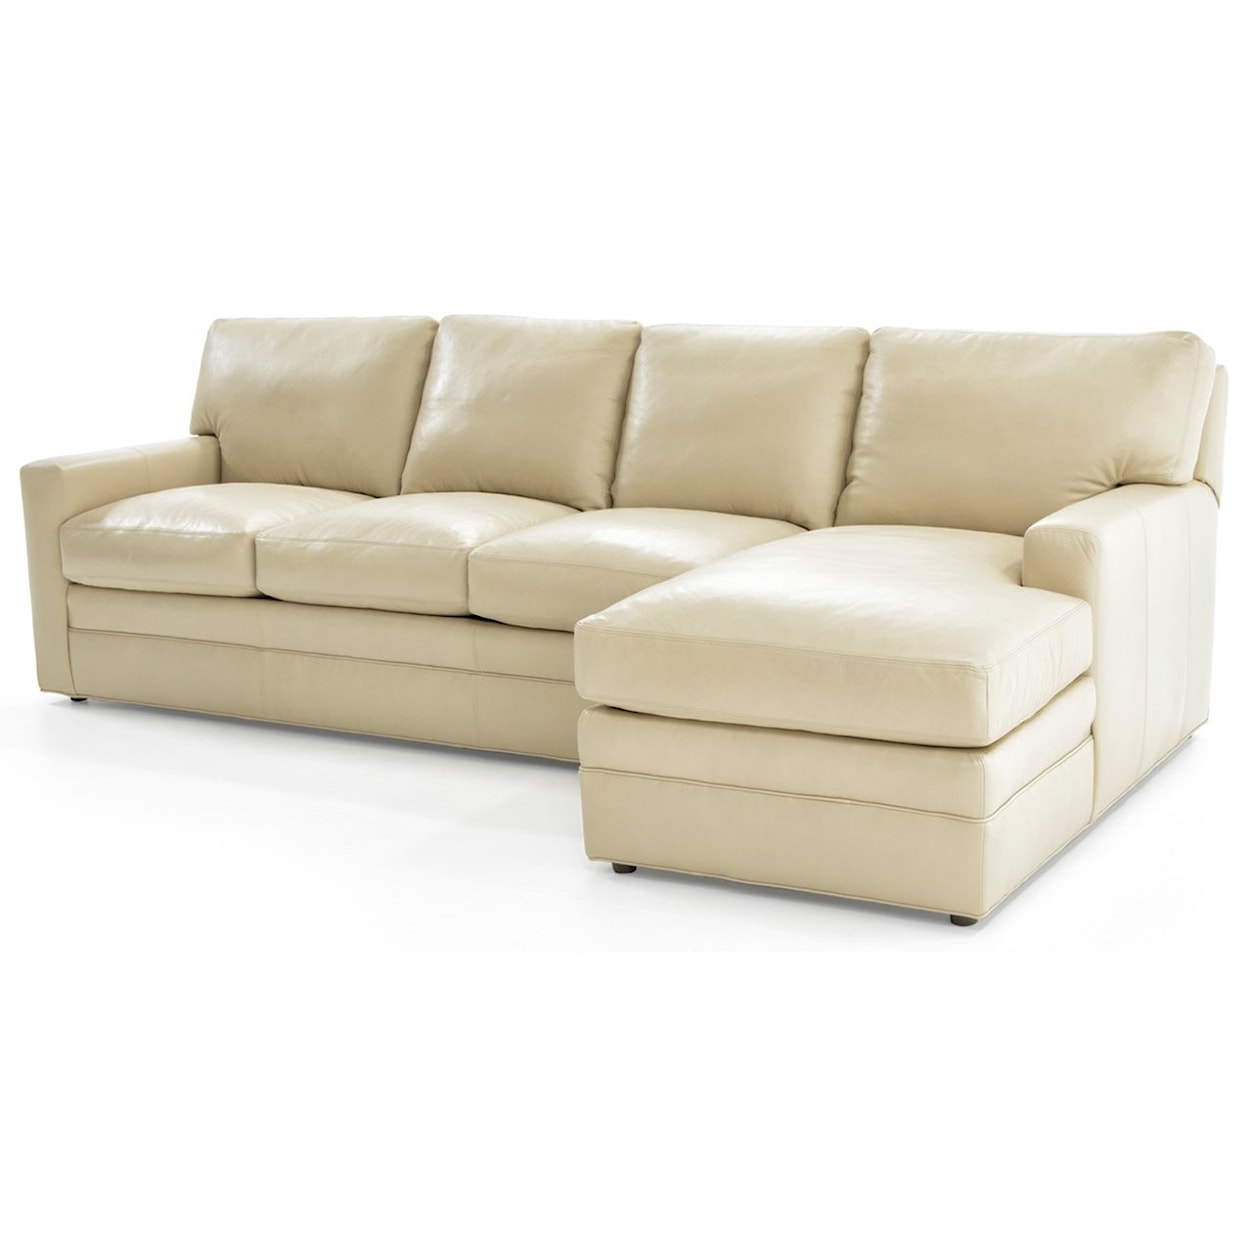 Whittemore-Sherrill 442 2 Pc L-Shape Sectional Sofa w/ RAF Chaise